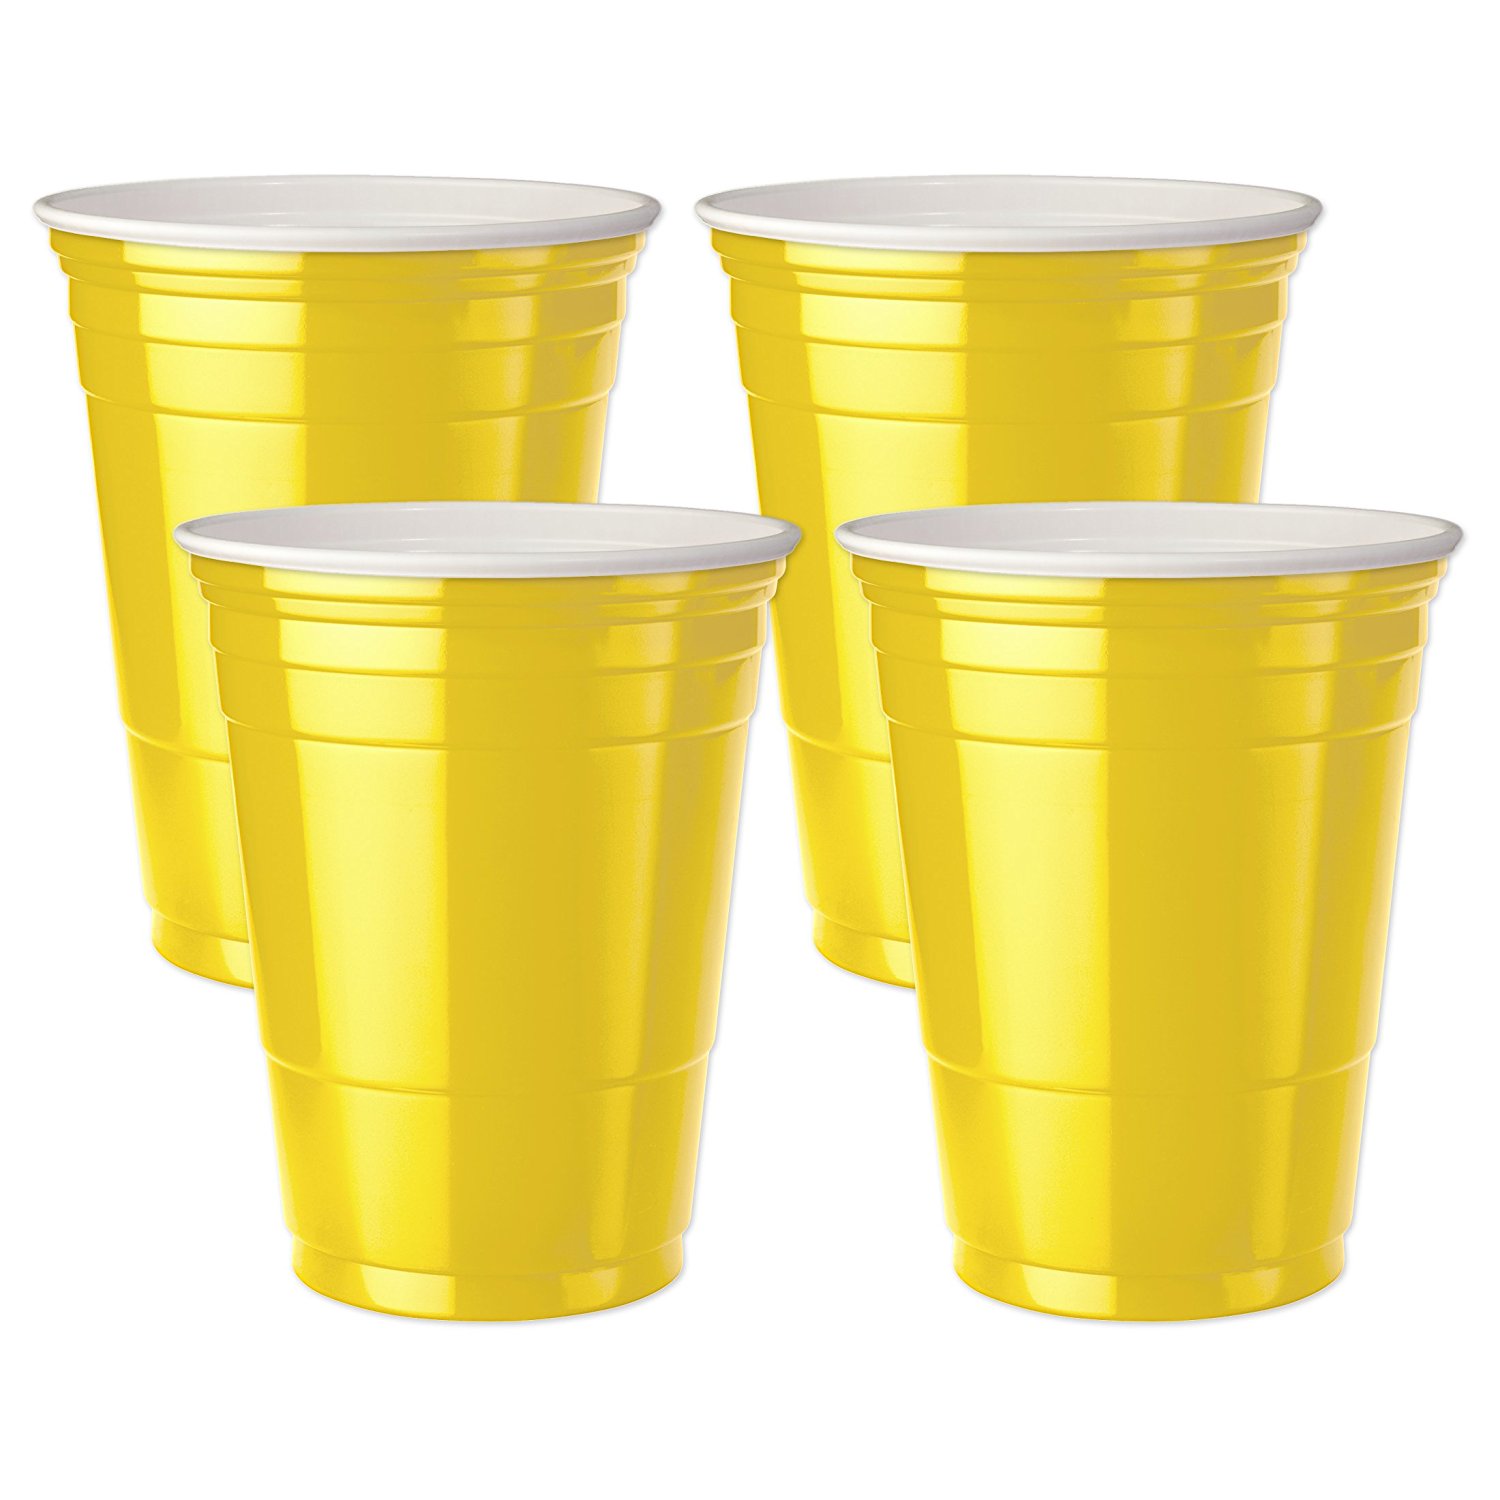 Amazon.com: Mr. Ice Bucket Double Walled Insulated Party Cups, 16 ...